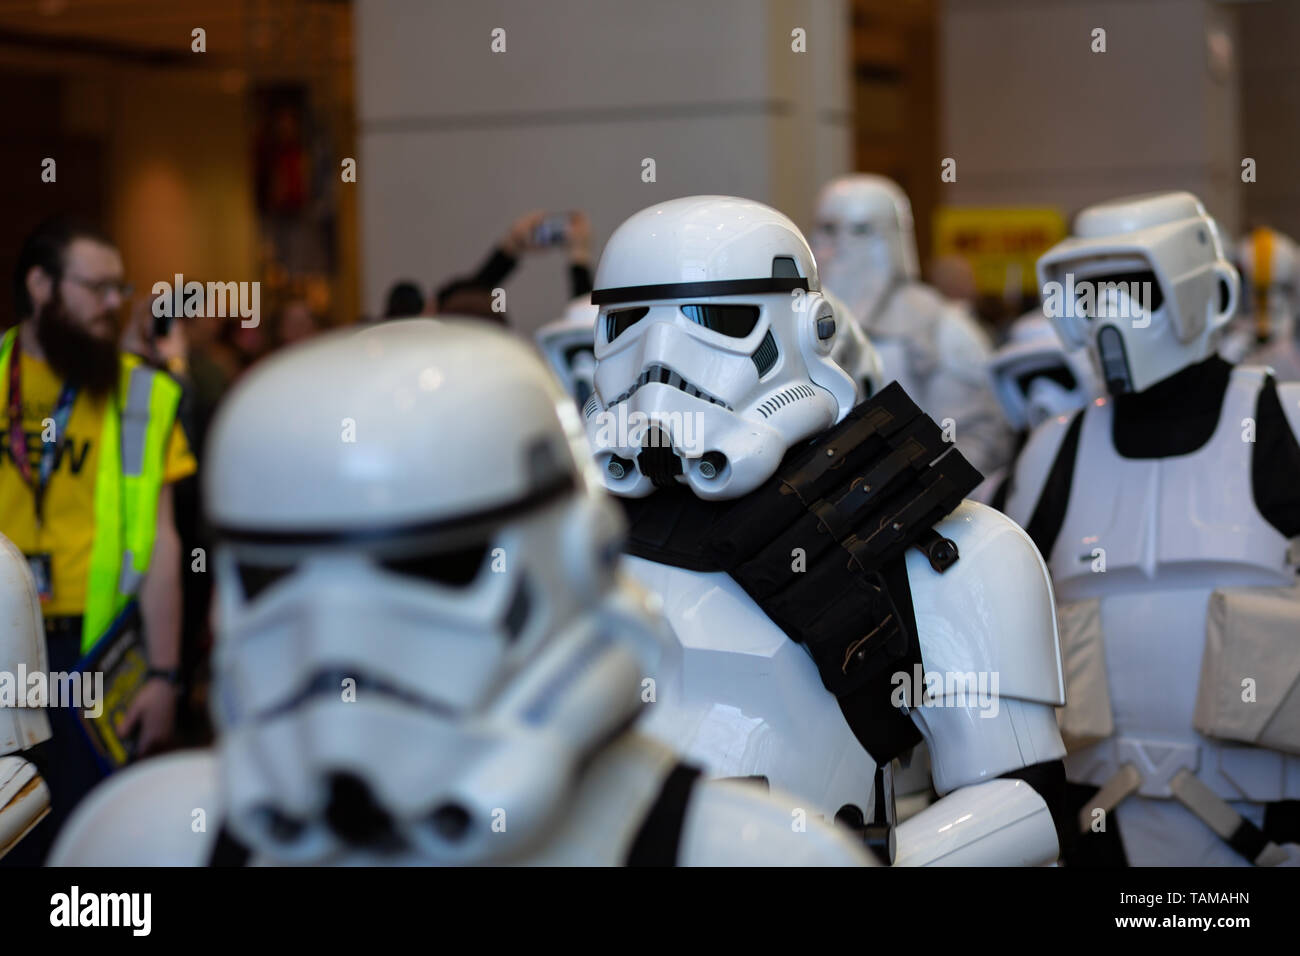 People dressed up as storm troopers at Star Wars Celebration 2019 - Chicago, IL Stock Photo